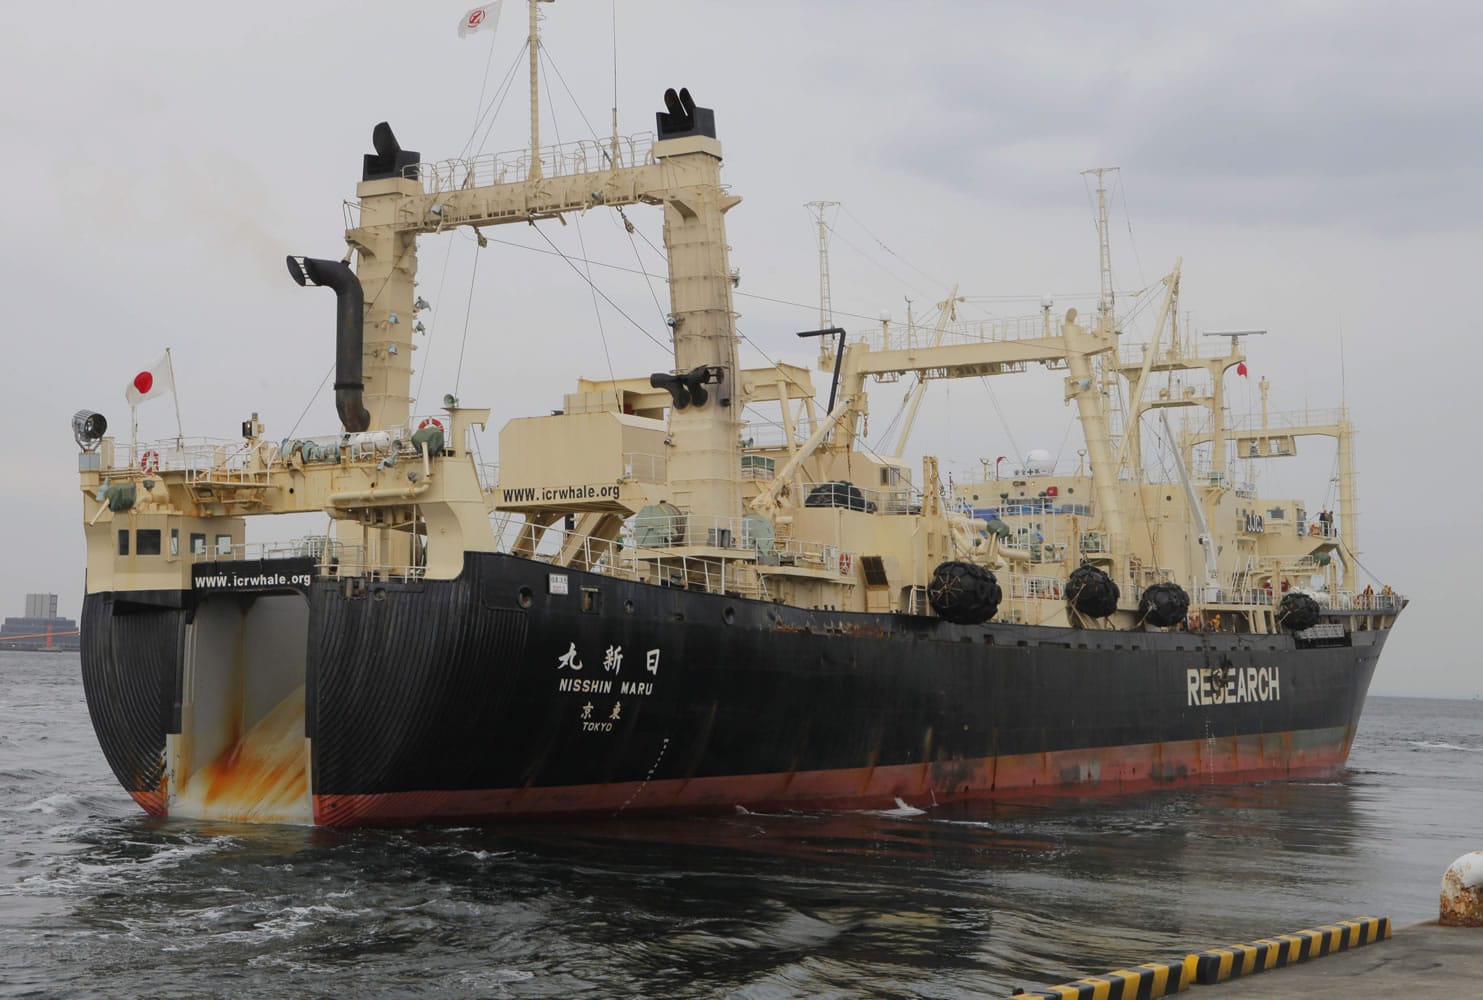 Japan's whaling ship Nisshin Maru leaves a port in Tokyo on March 25, 2011, for the water off Miyagi Prefecture.